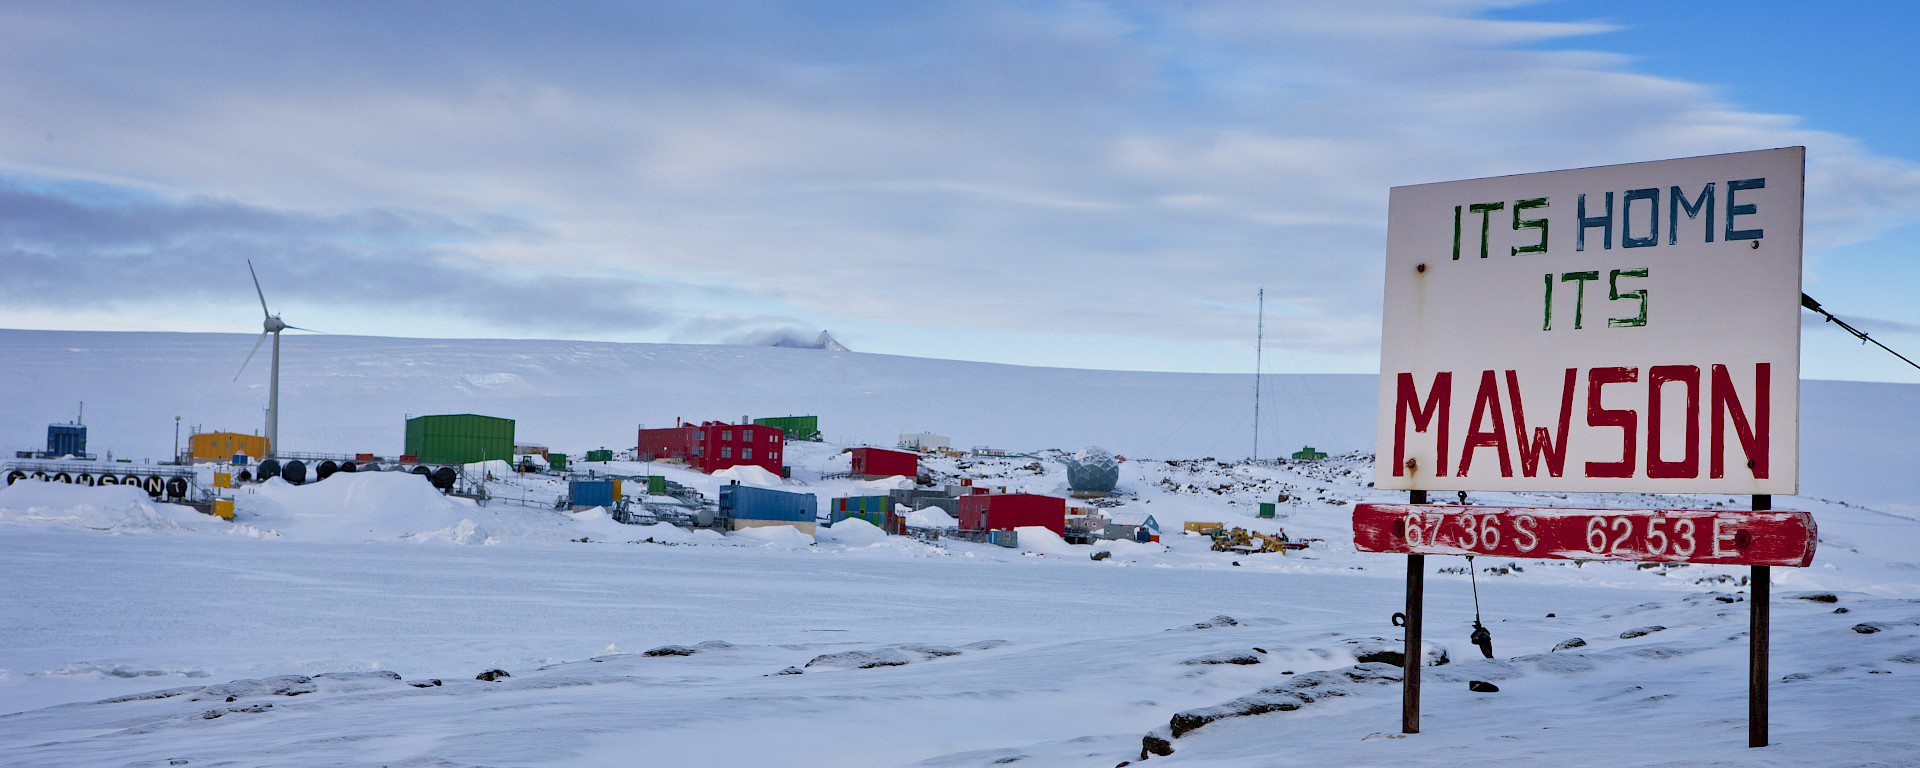 Mawson station from West Arm after snowfall, showing station sign "Its Home its Mawson" plus a iced over Horseshoe Harbour